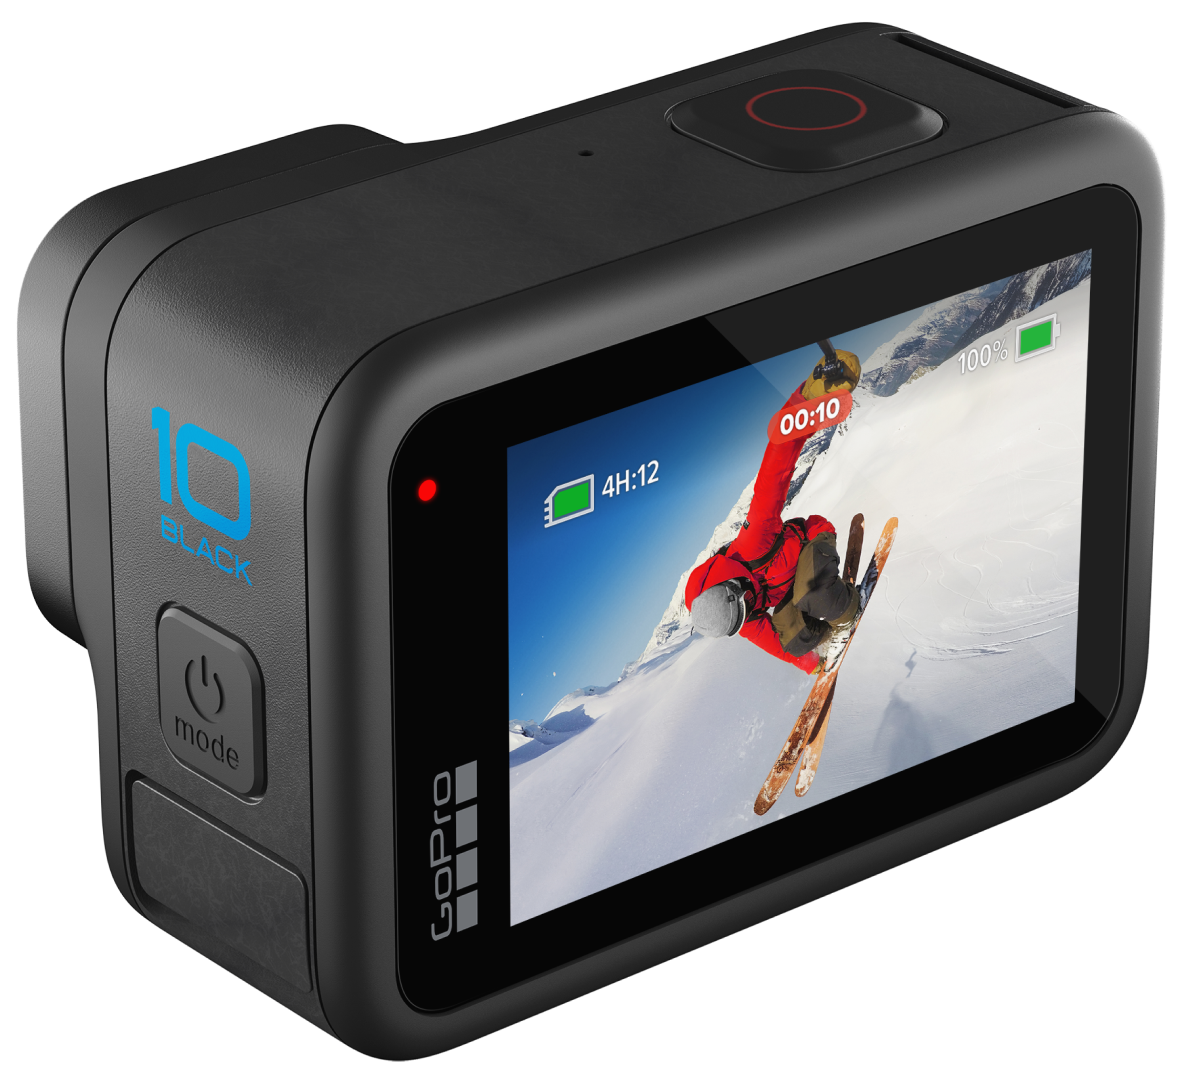 With 5K video recording, voice control, 1-button operation, touch display and waterproof design, the HERO10 Black is the most powerful and user-friendly GoPro ever.